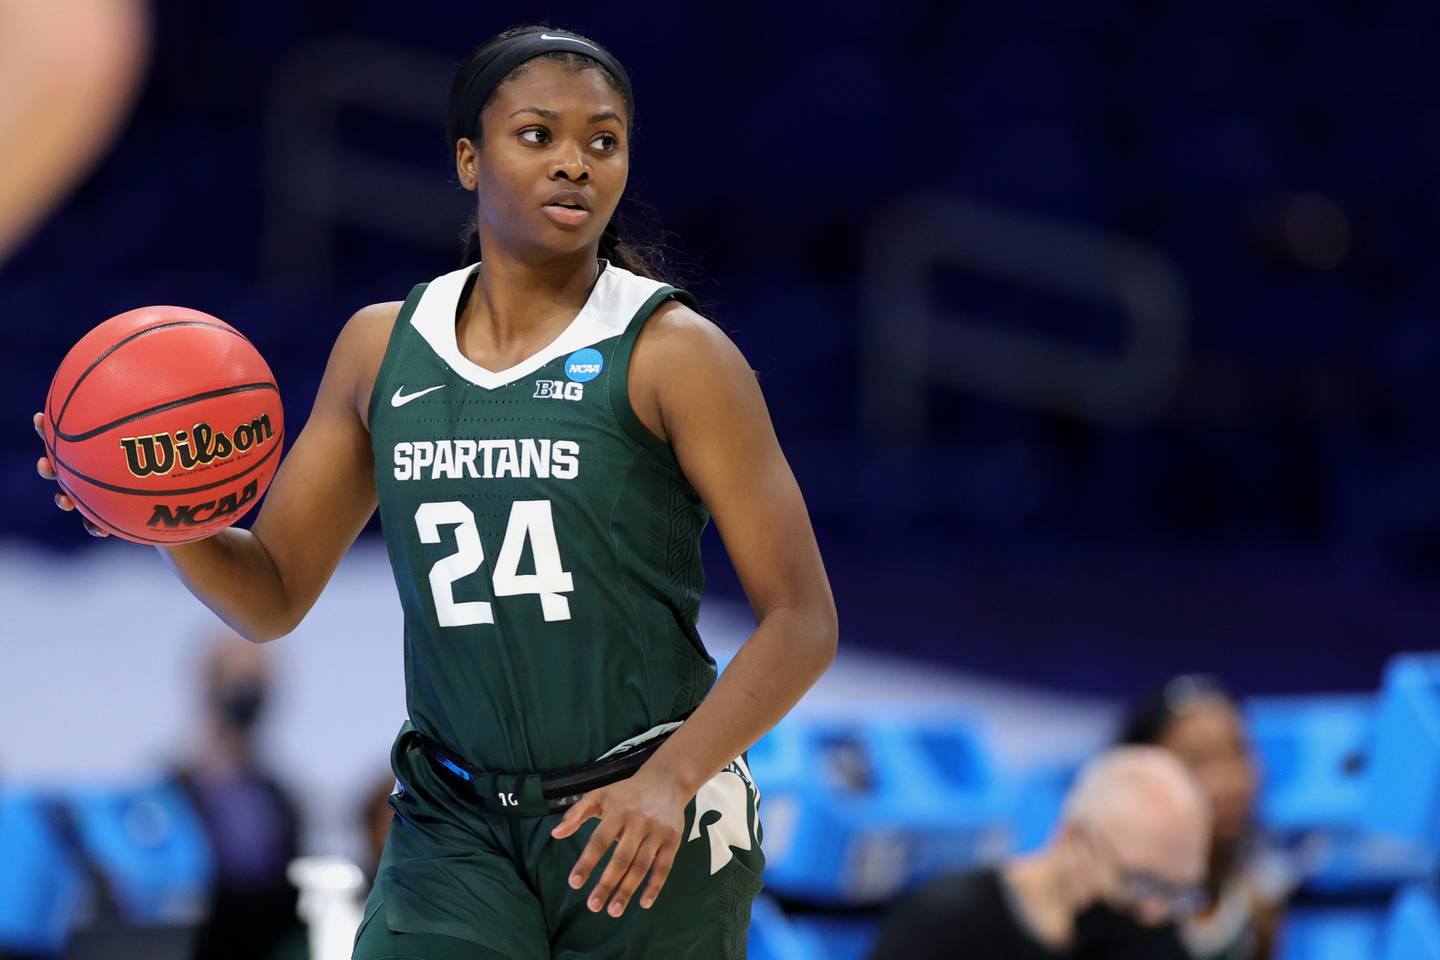 SAN ANTONIO, TEXAS - MARCH 22: Nia Clouden #24 of the Michigan State Spartans controls the ball against the Iowa State Cyclones during the first half in the first round game of the 2021 NCAA Women's Basketball Tournament at the Alamodome on March 22, 2021 in San Antonio, Texas.